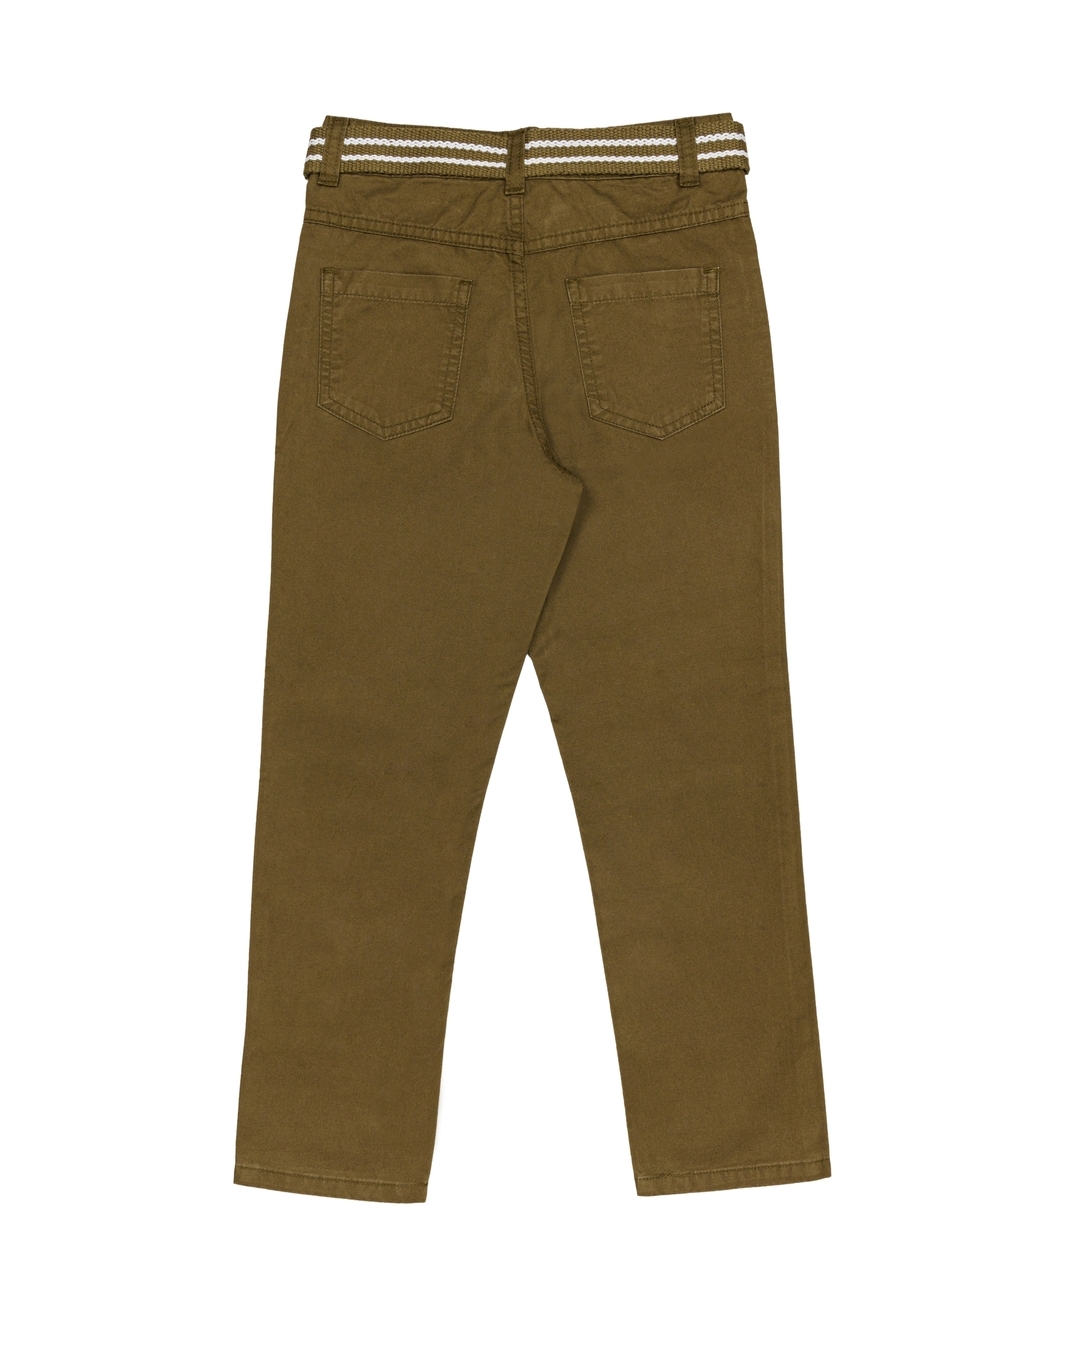 Buy LIFE Solid Cotton Regular Fit Boys Trousers | Shoppers Stop-anthinhphatland.vn